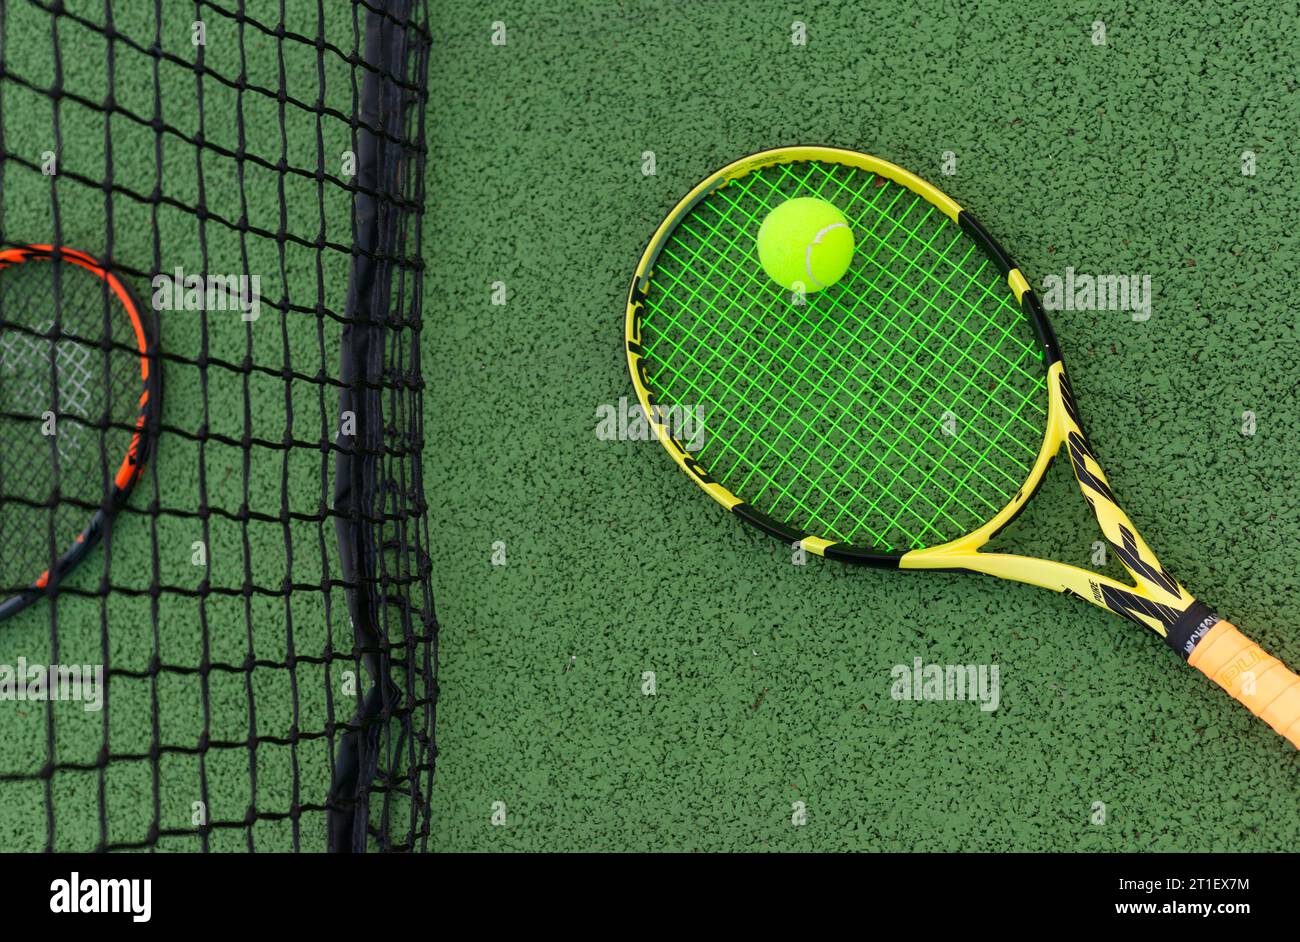 Two tennis rackets near the net with a ball Stock Photo